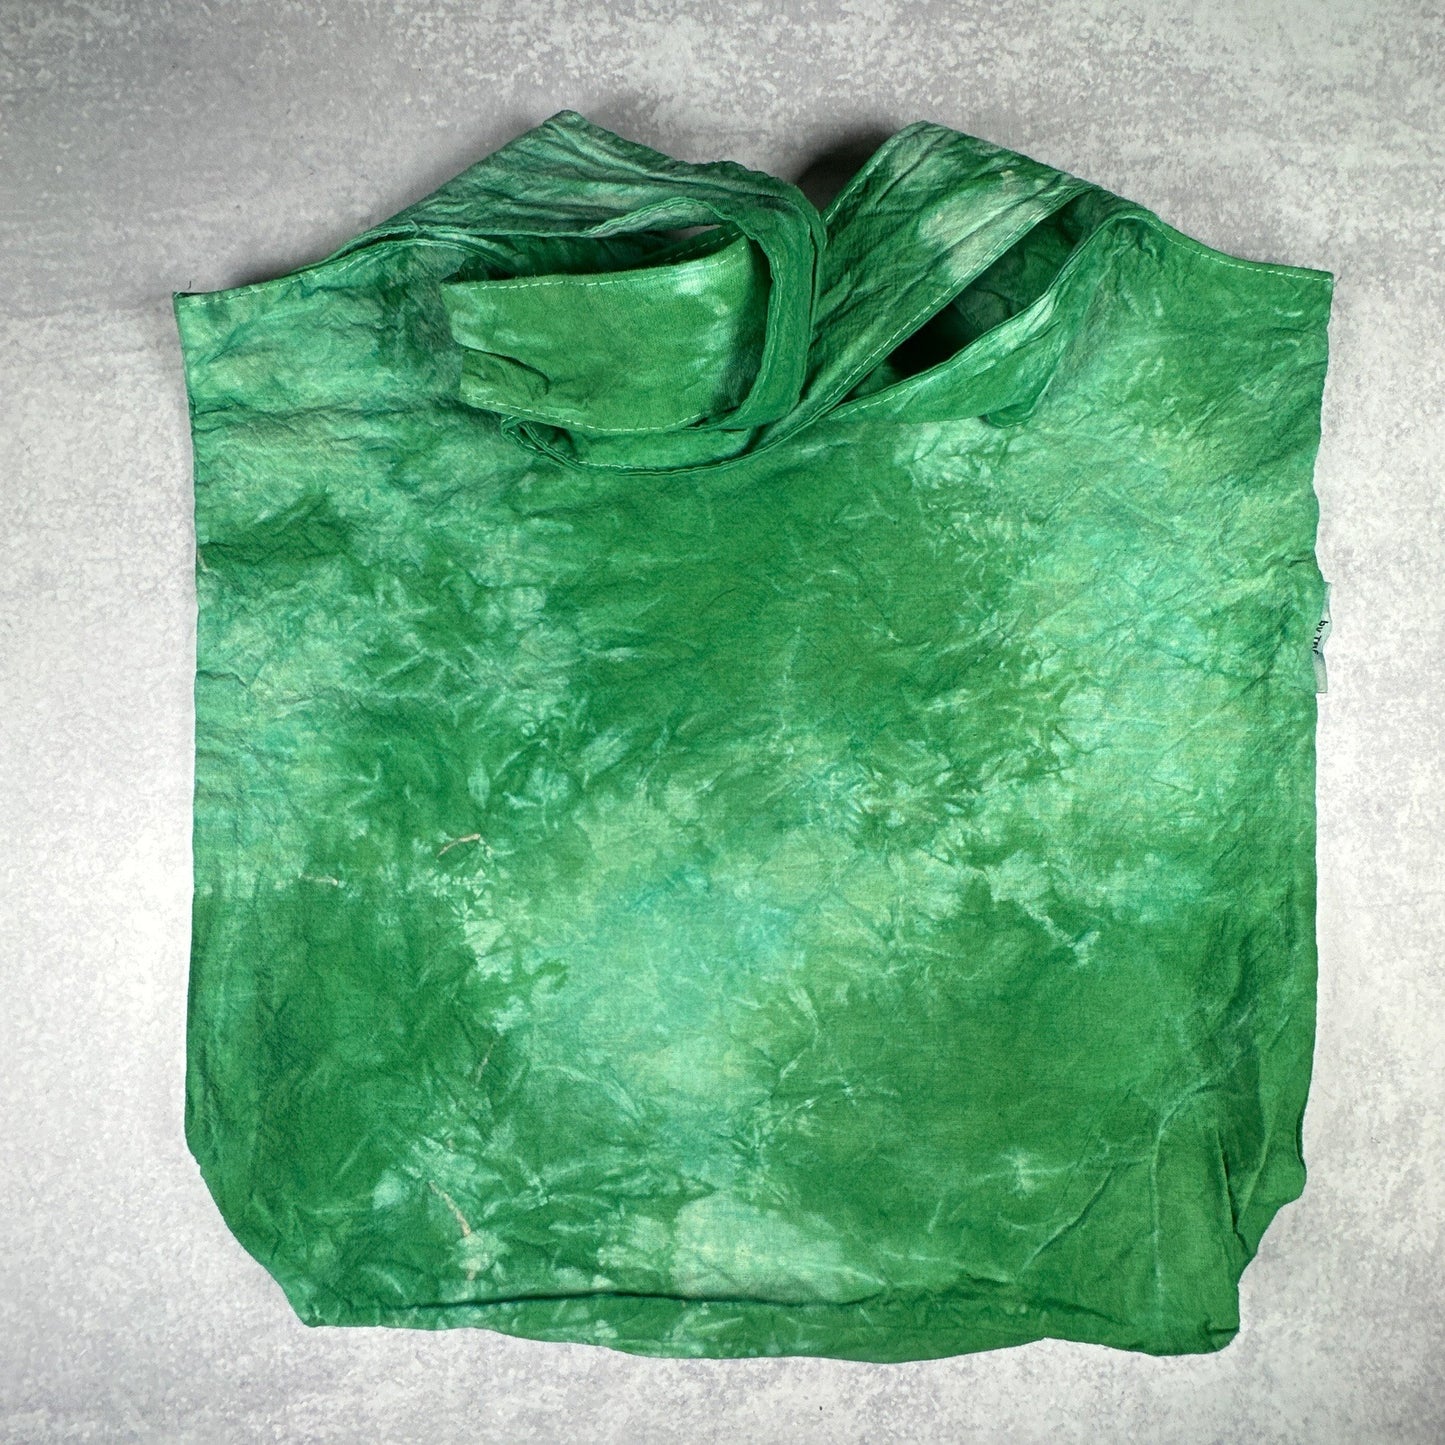 Kelly Green Tie-dye JUMPing Spider and Mushroom Tote Bag - The Serpentry